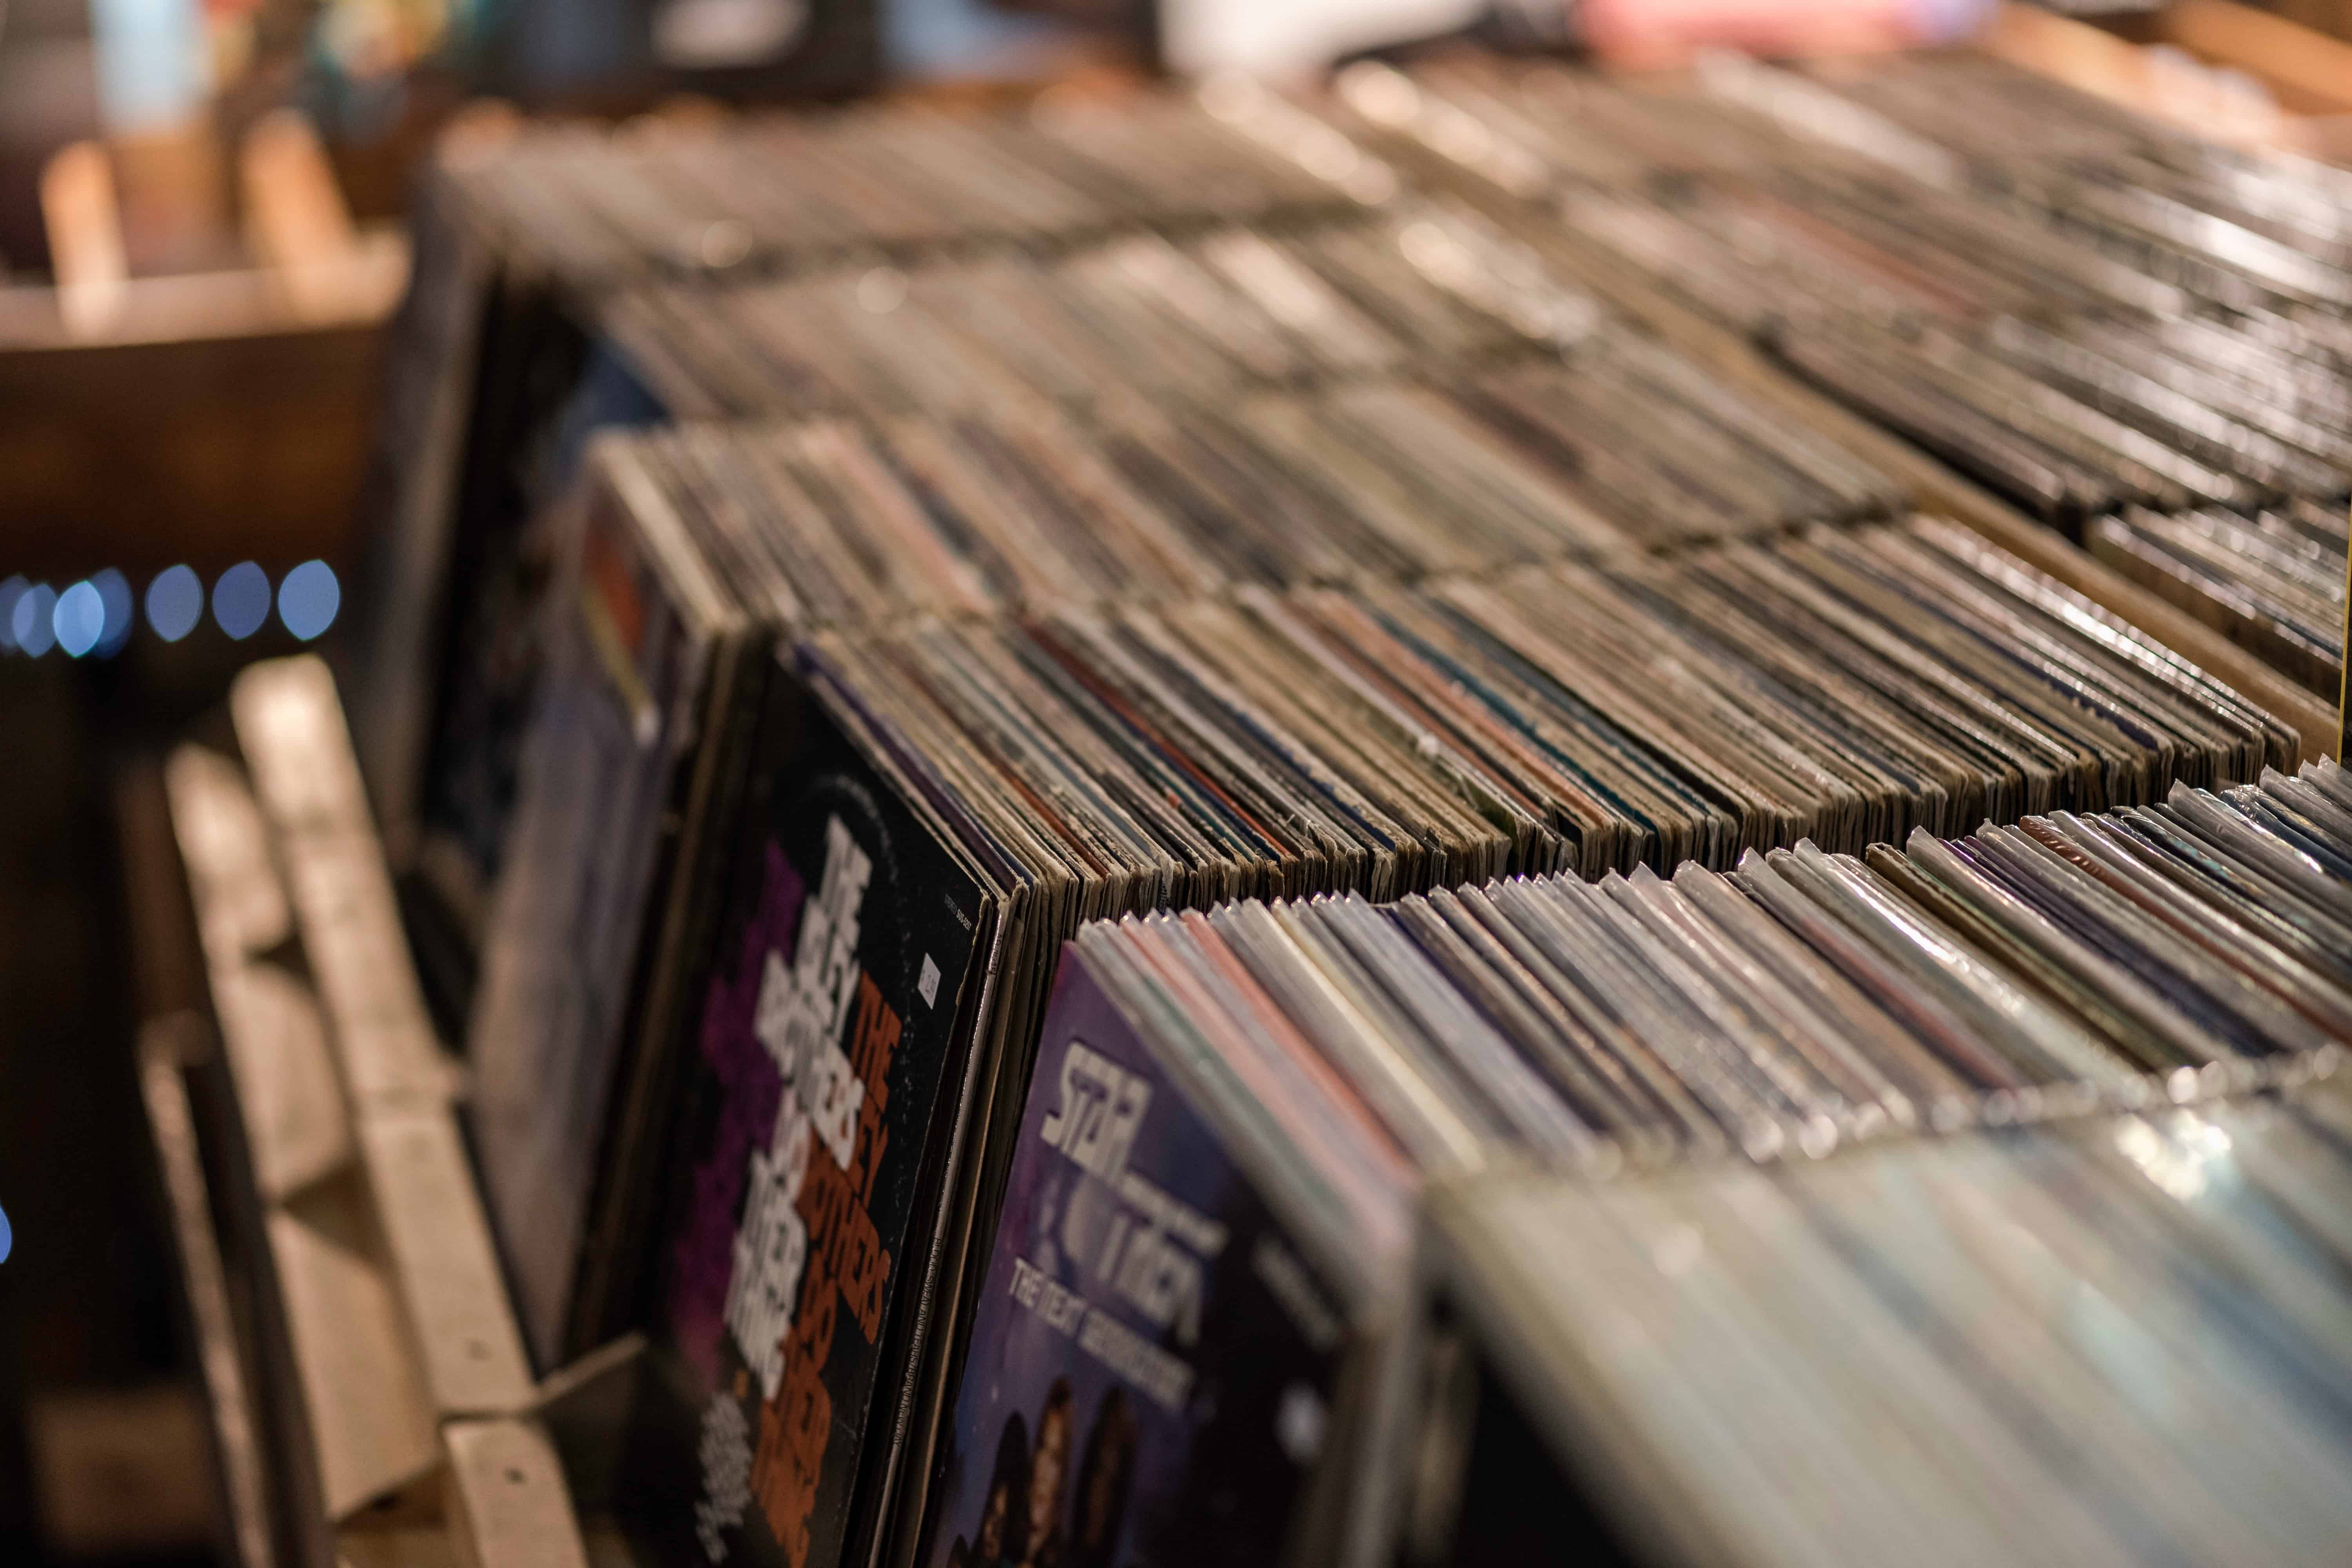 Vinyl sales surpassed CD sales for the first time since the 1980s